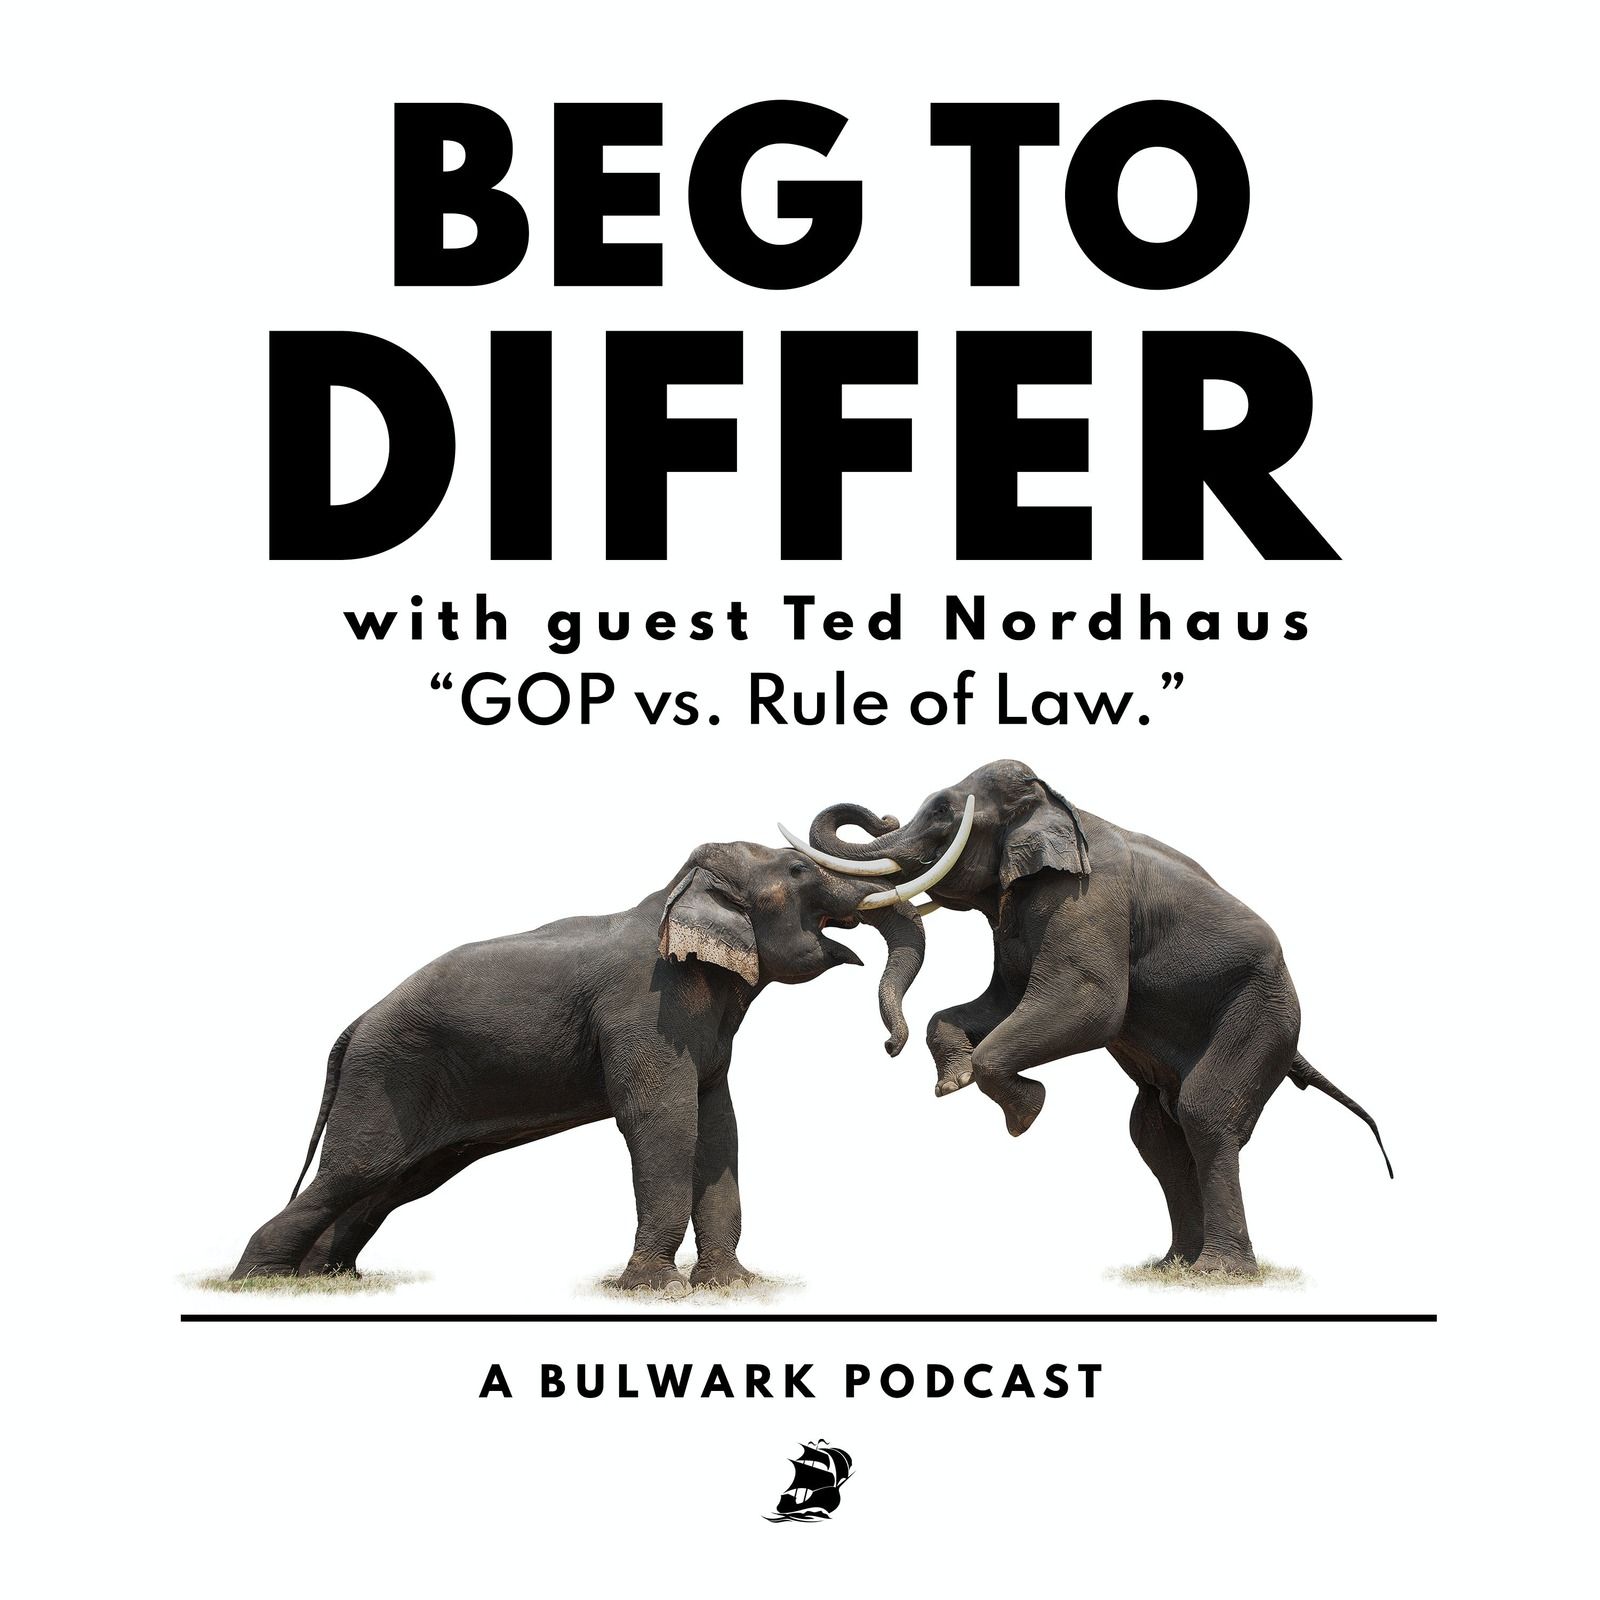 GOP vs. Rule of Law (with Ted Nordhaus)